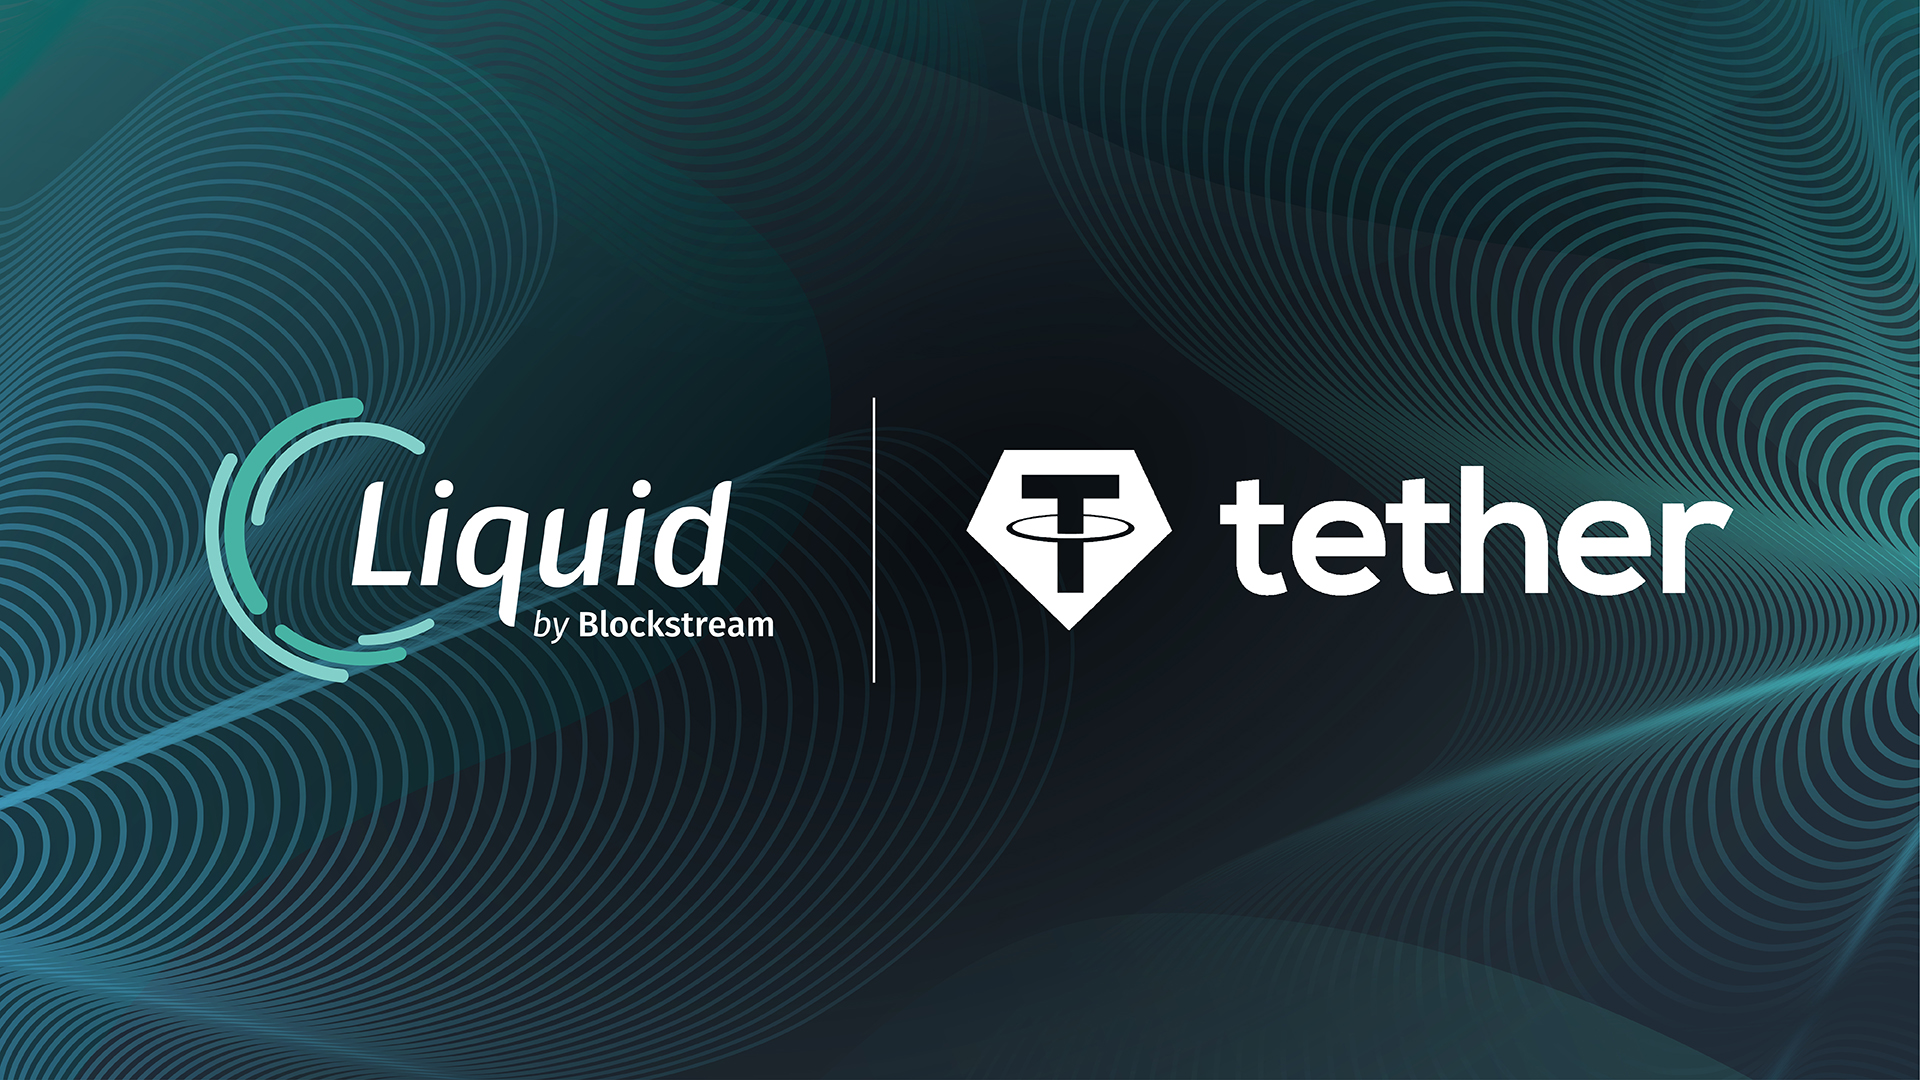 Tether launches on the Liquid Network